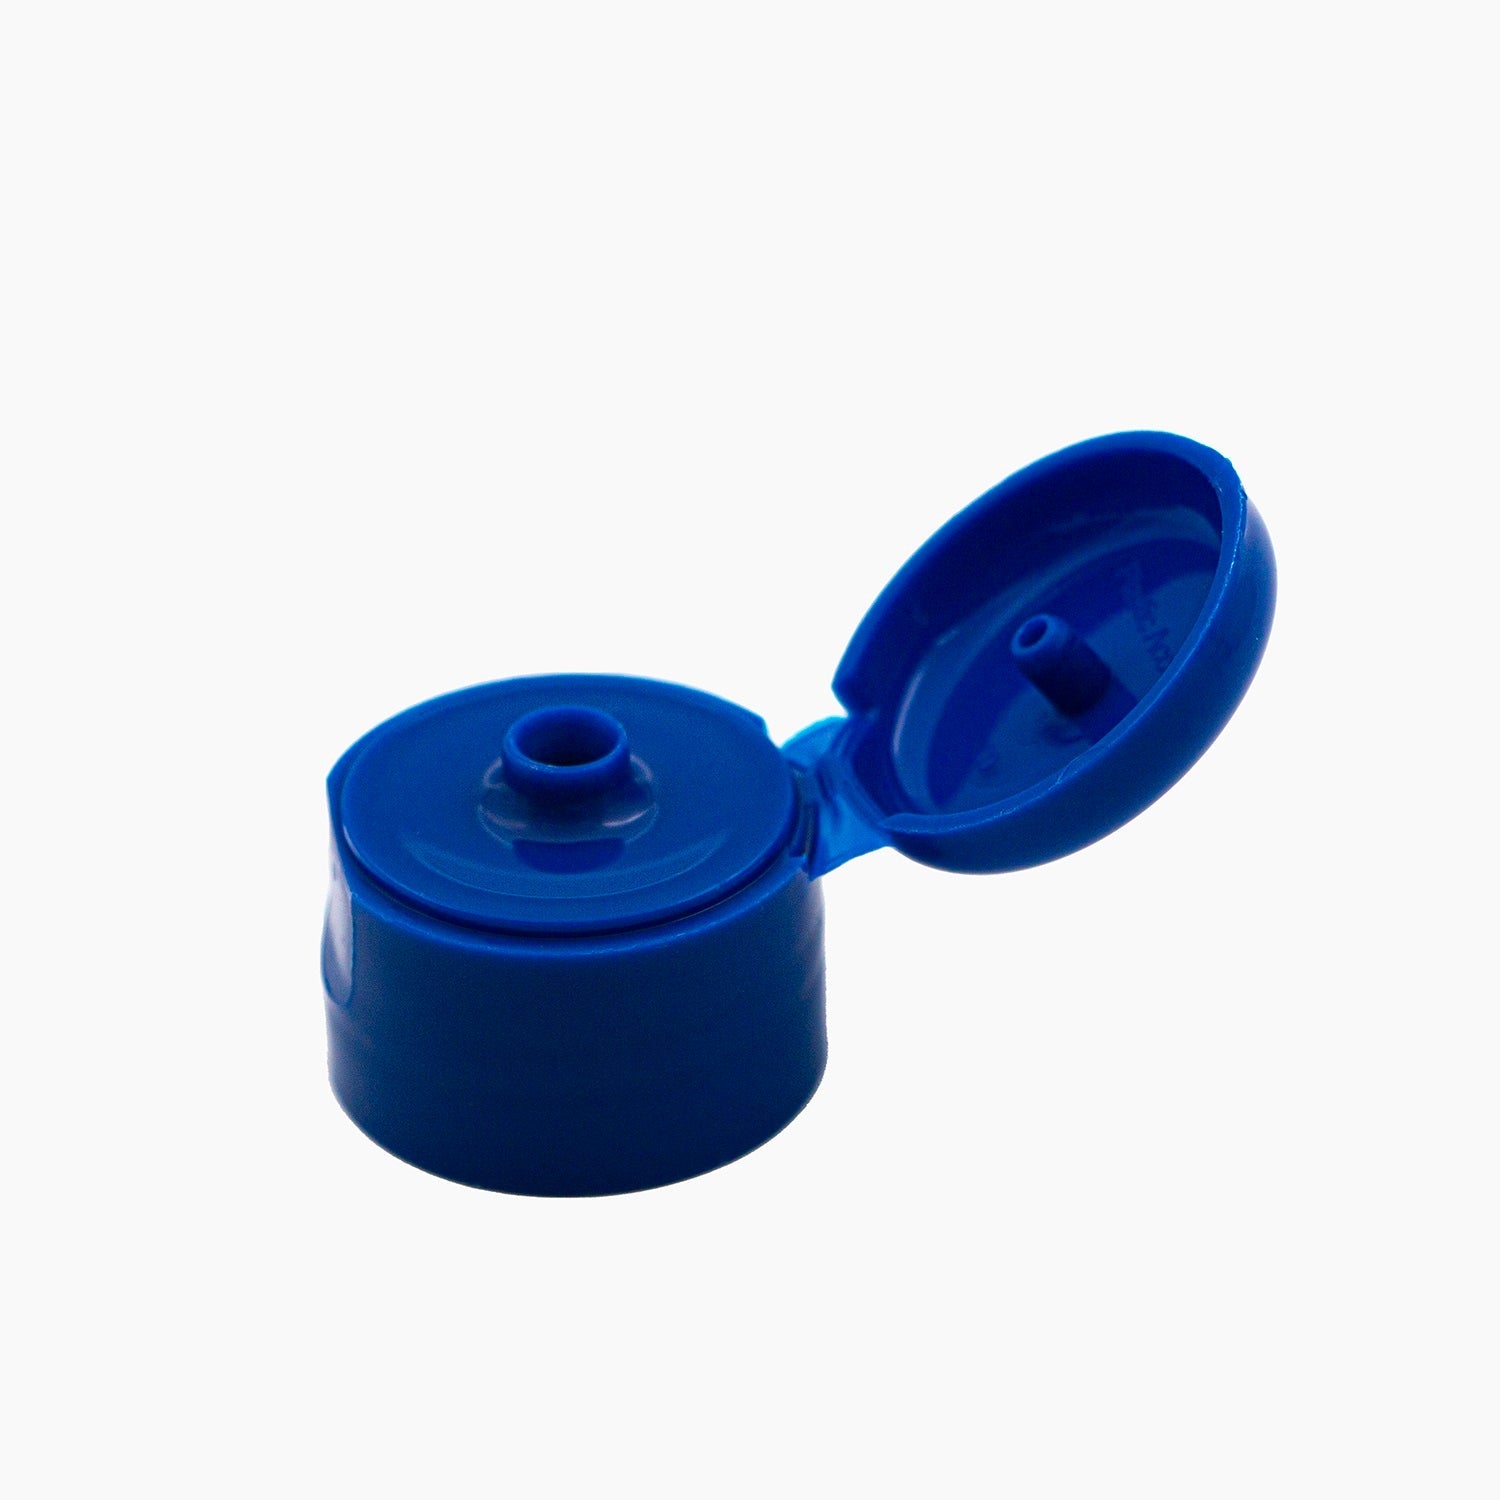 Blue 24mm Open Flip Top Cap On A White Background | Brightpack Closures And Accessories